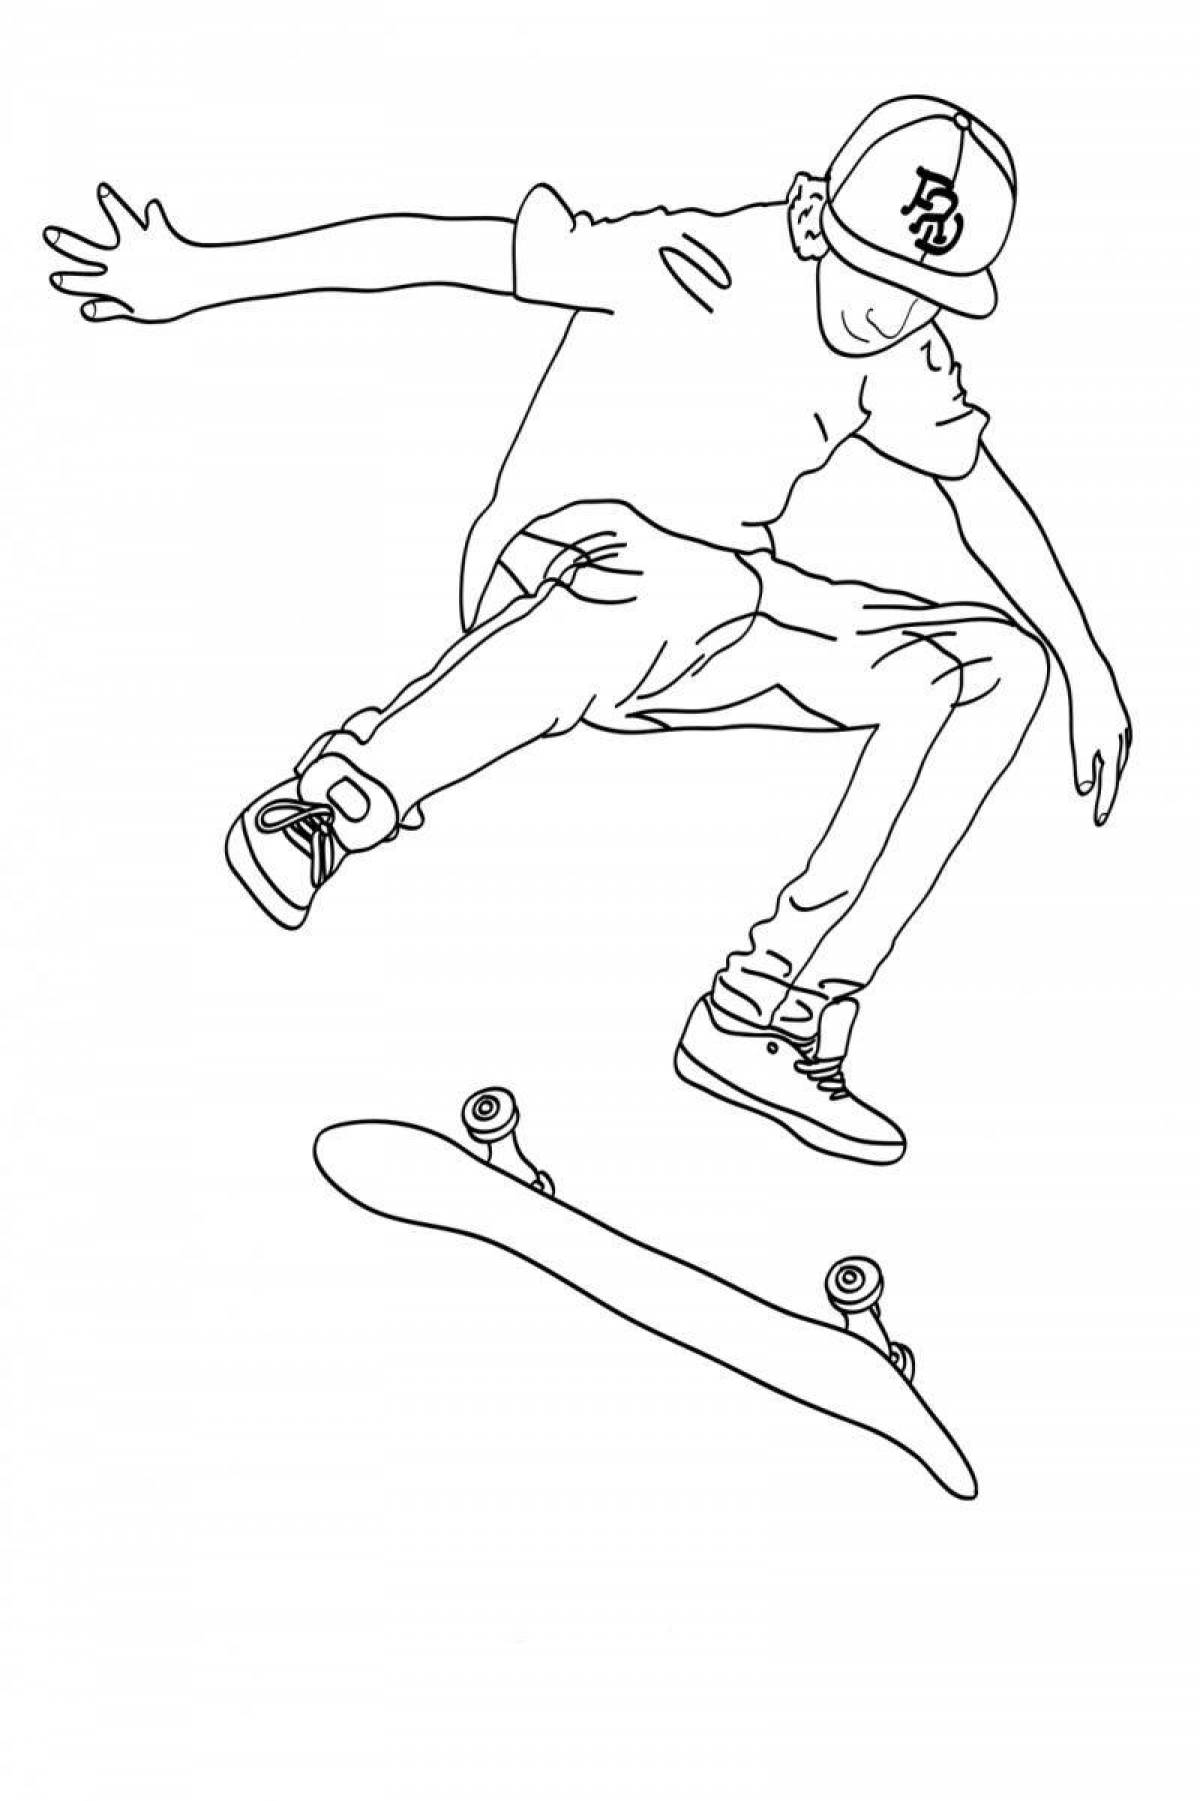 Adventurous skateboarder coloring page